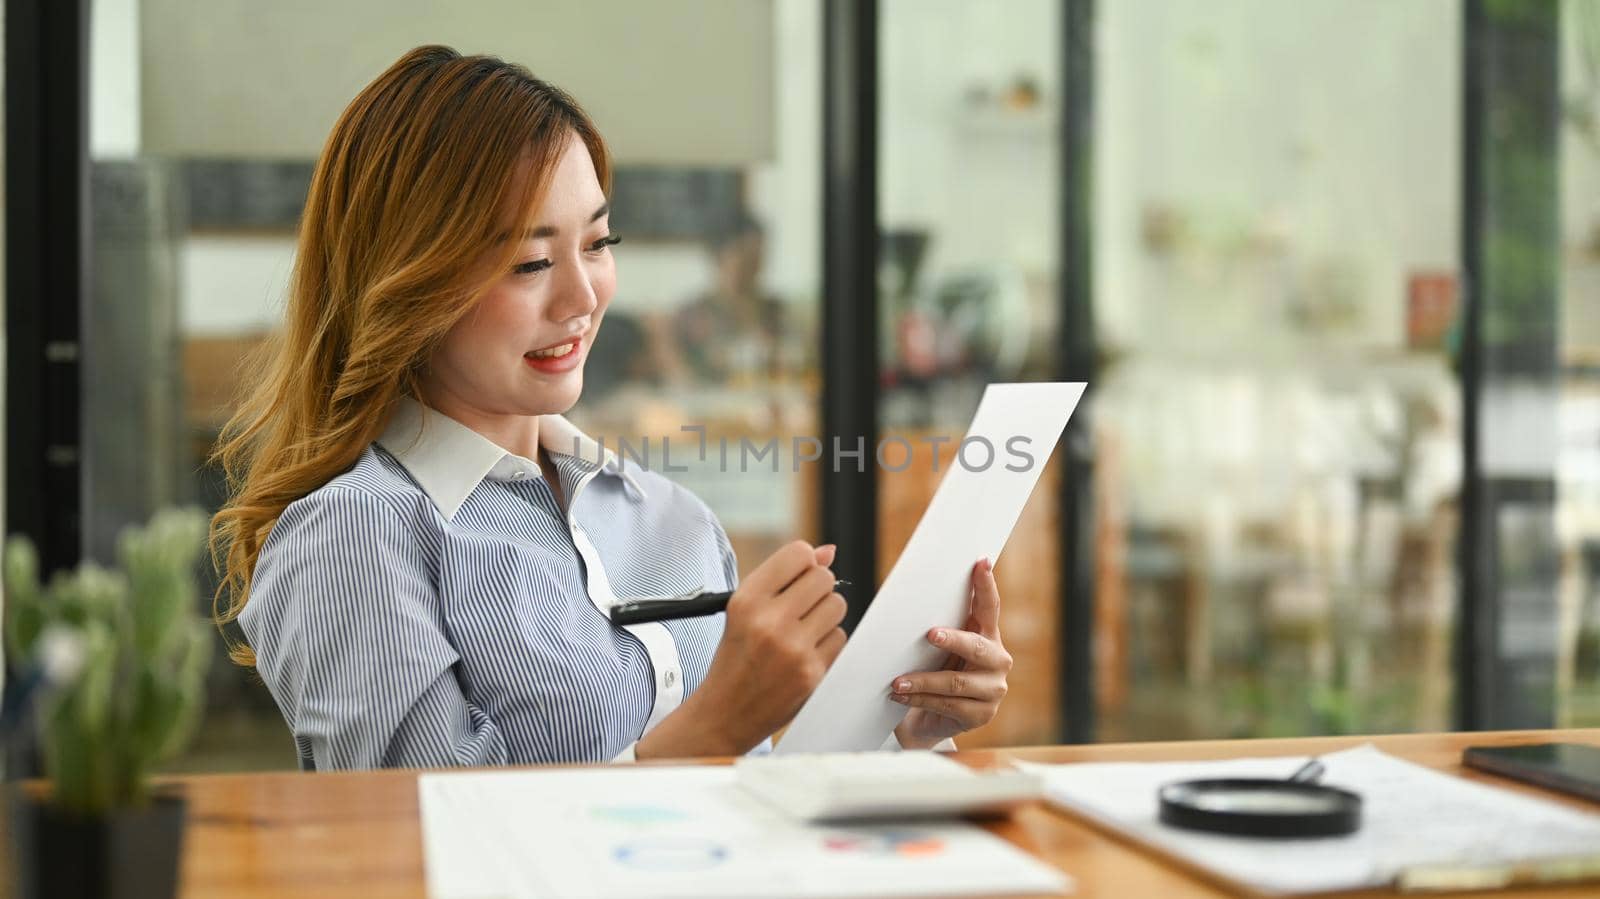 Professional female accountant examining the numerical data on financial document at her workplace by prathanchorruangsak